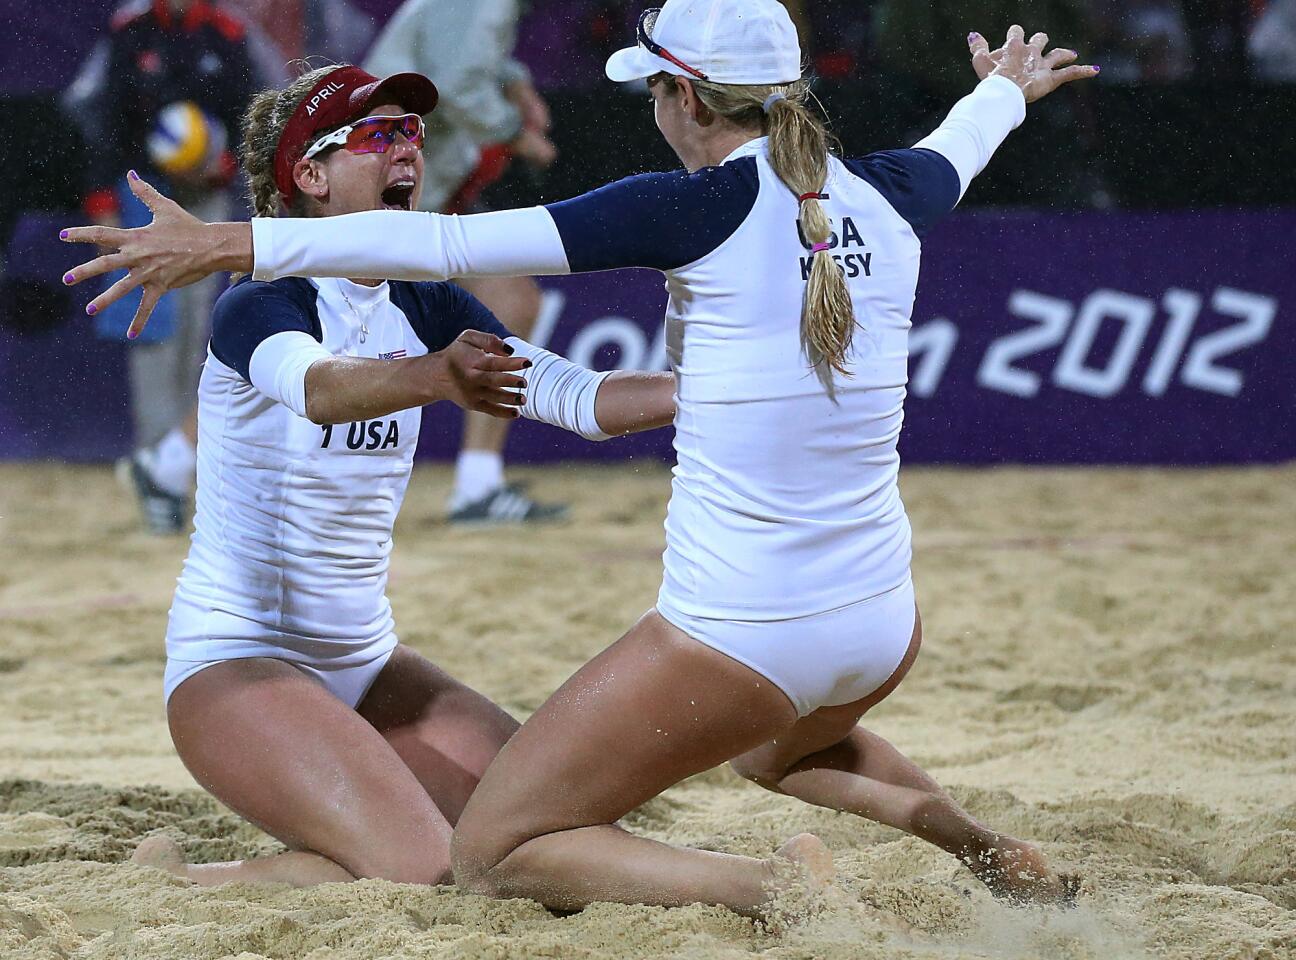 United States teammates Jennifer Kessy, right, and April Ross embrace after defeating top-seeded Brazil to move on to the women's beach volleyball finals against another American team.